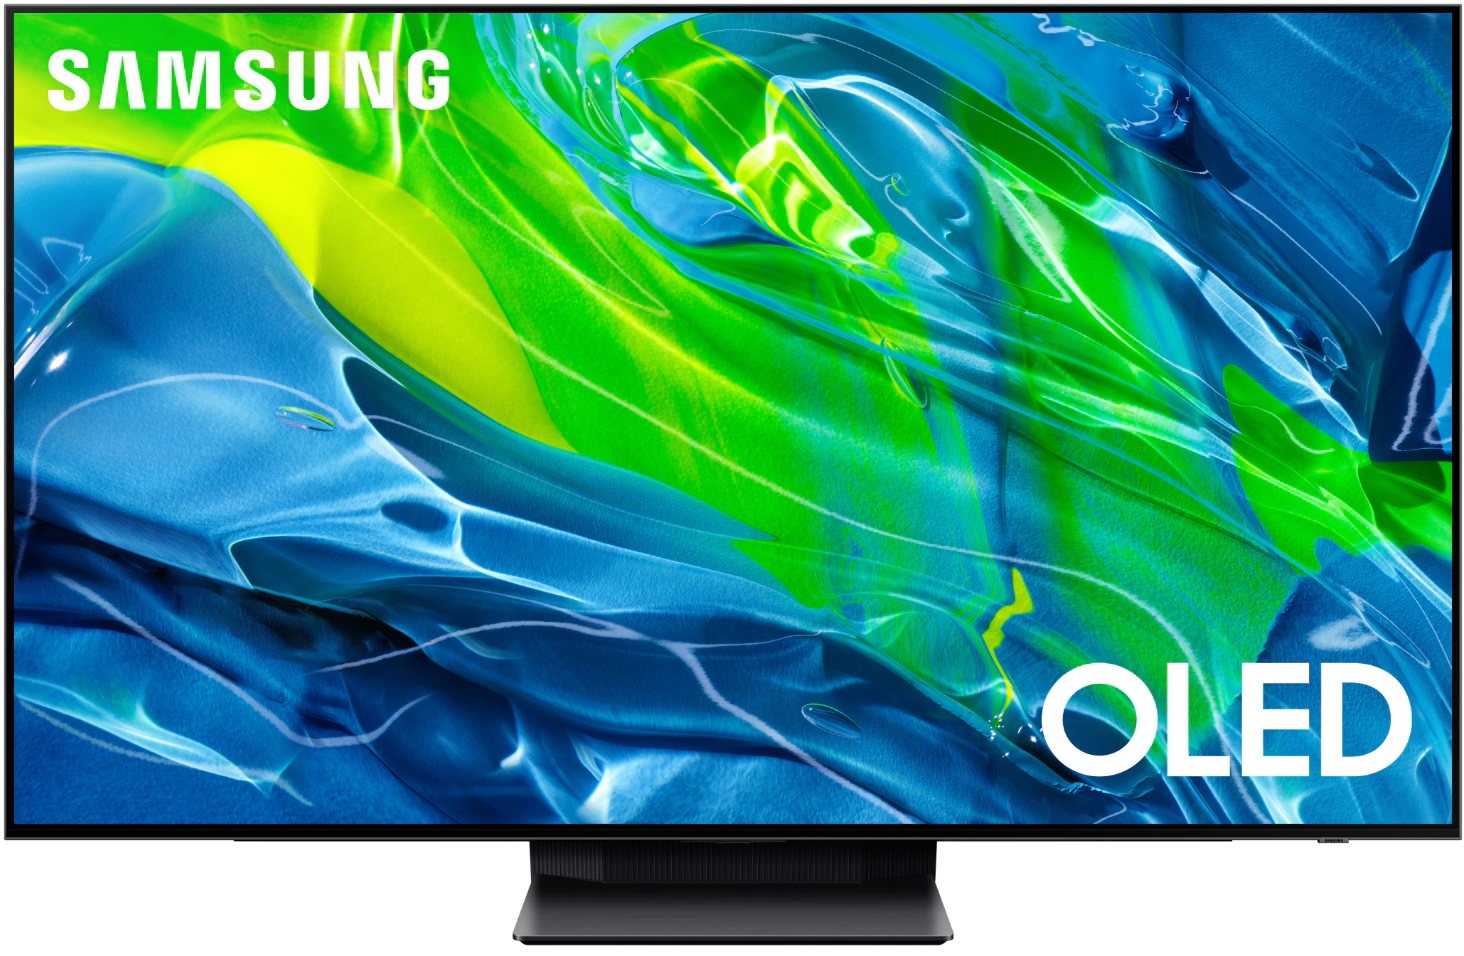 YMMV Samsung S95BP 65” OLED TV $999.91, in warehouse only